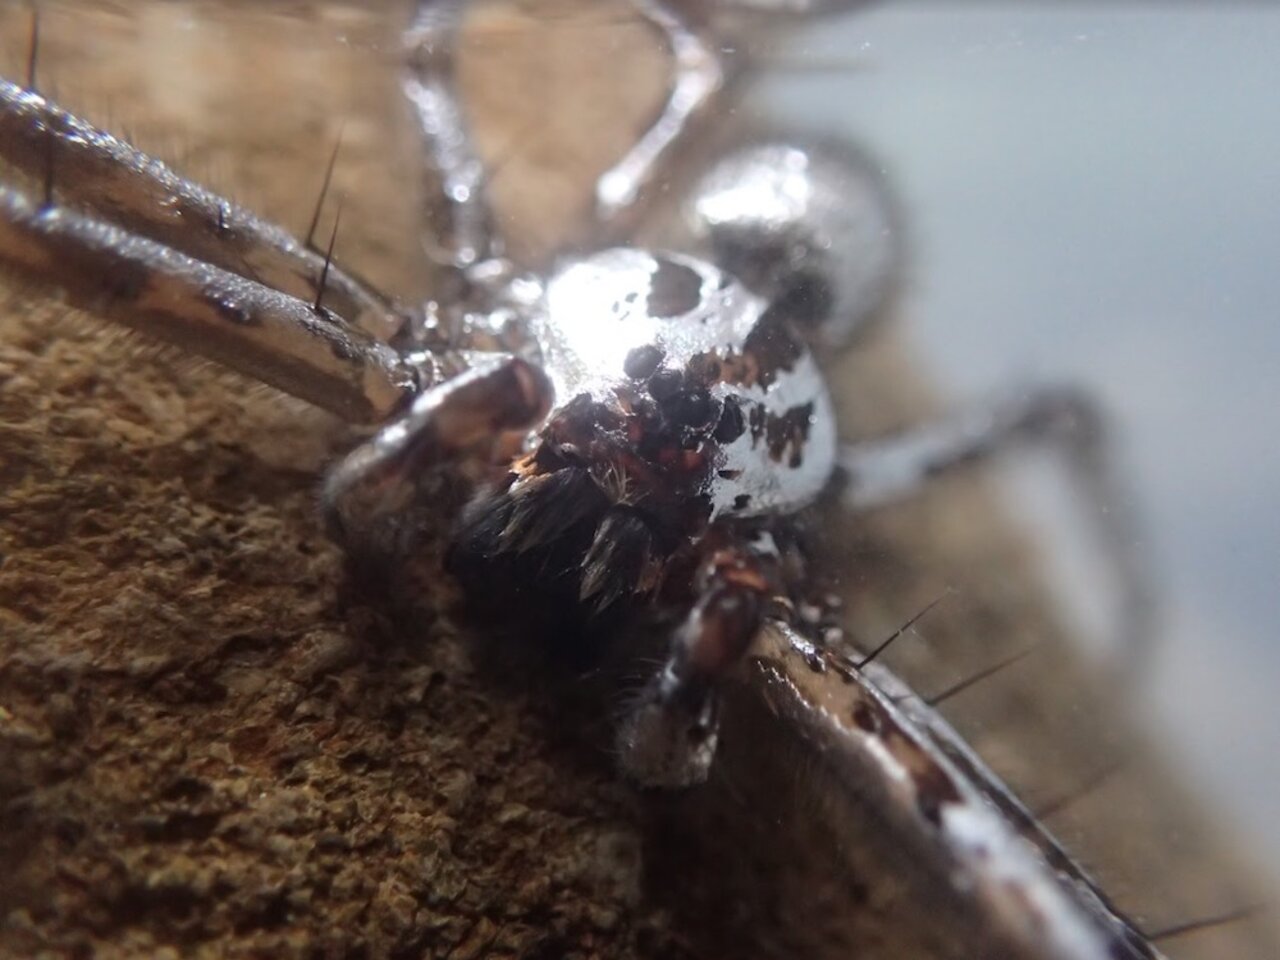 How these spiders use bubbles to live underwater